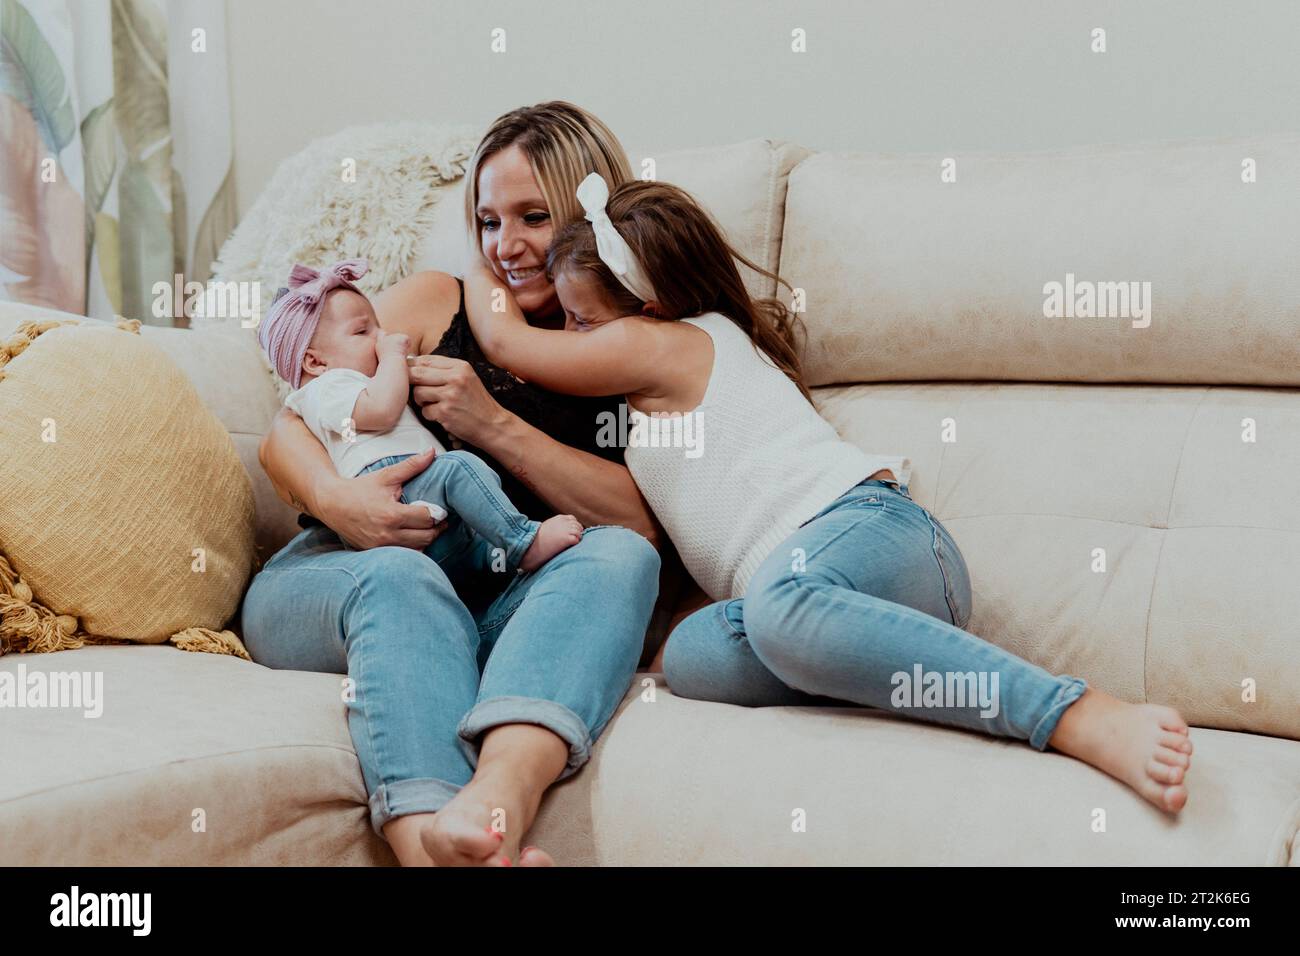 A young mother holding her baby while her toddler hug her Stock Photo